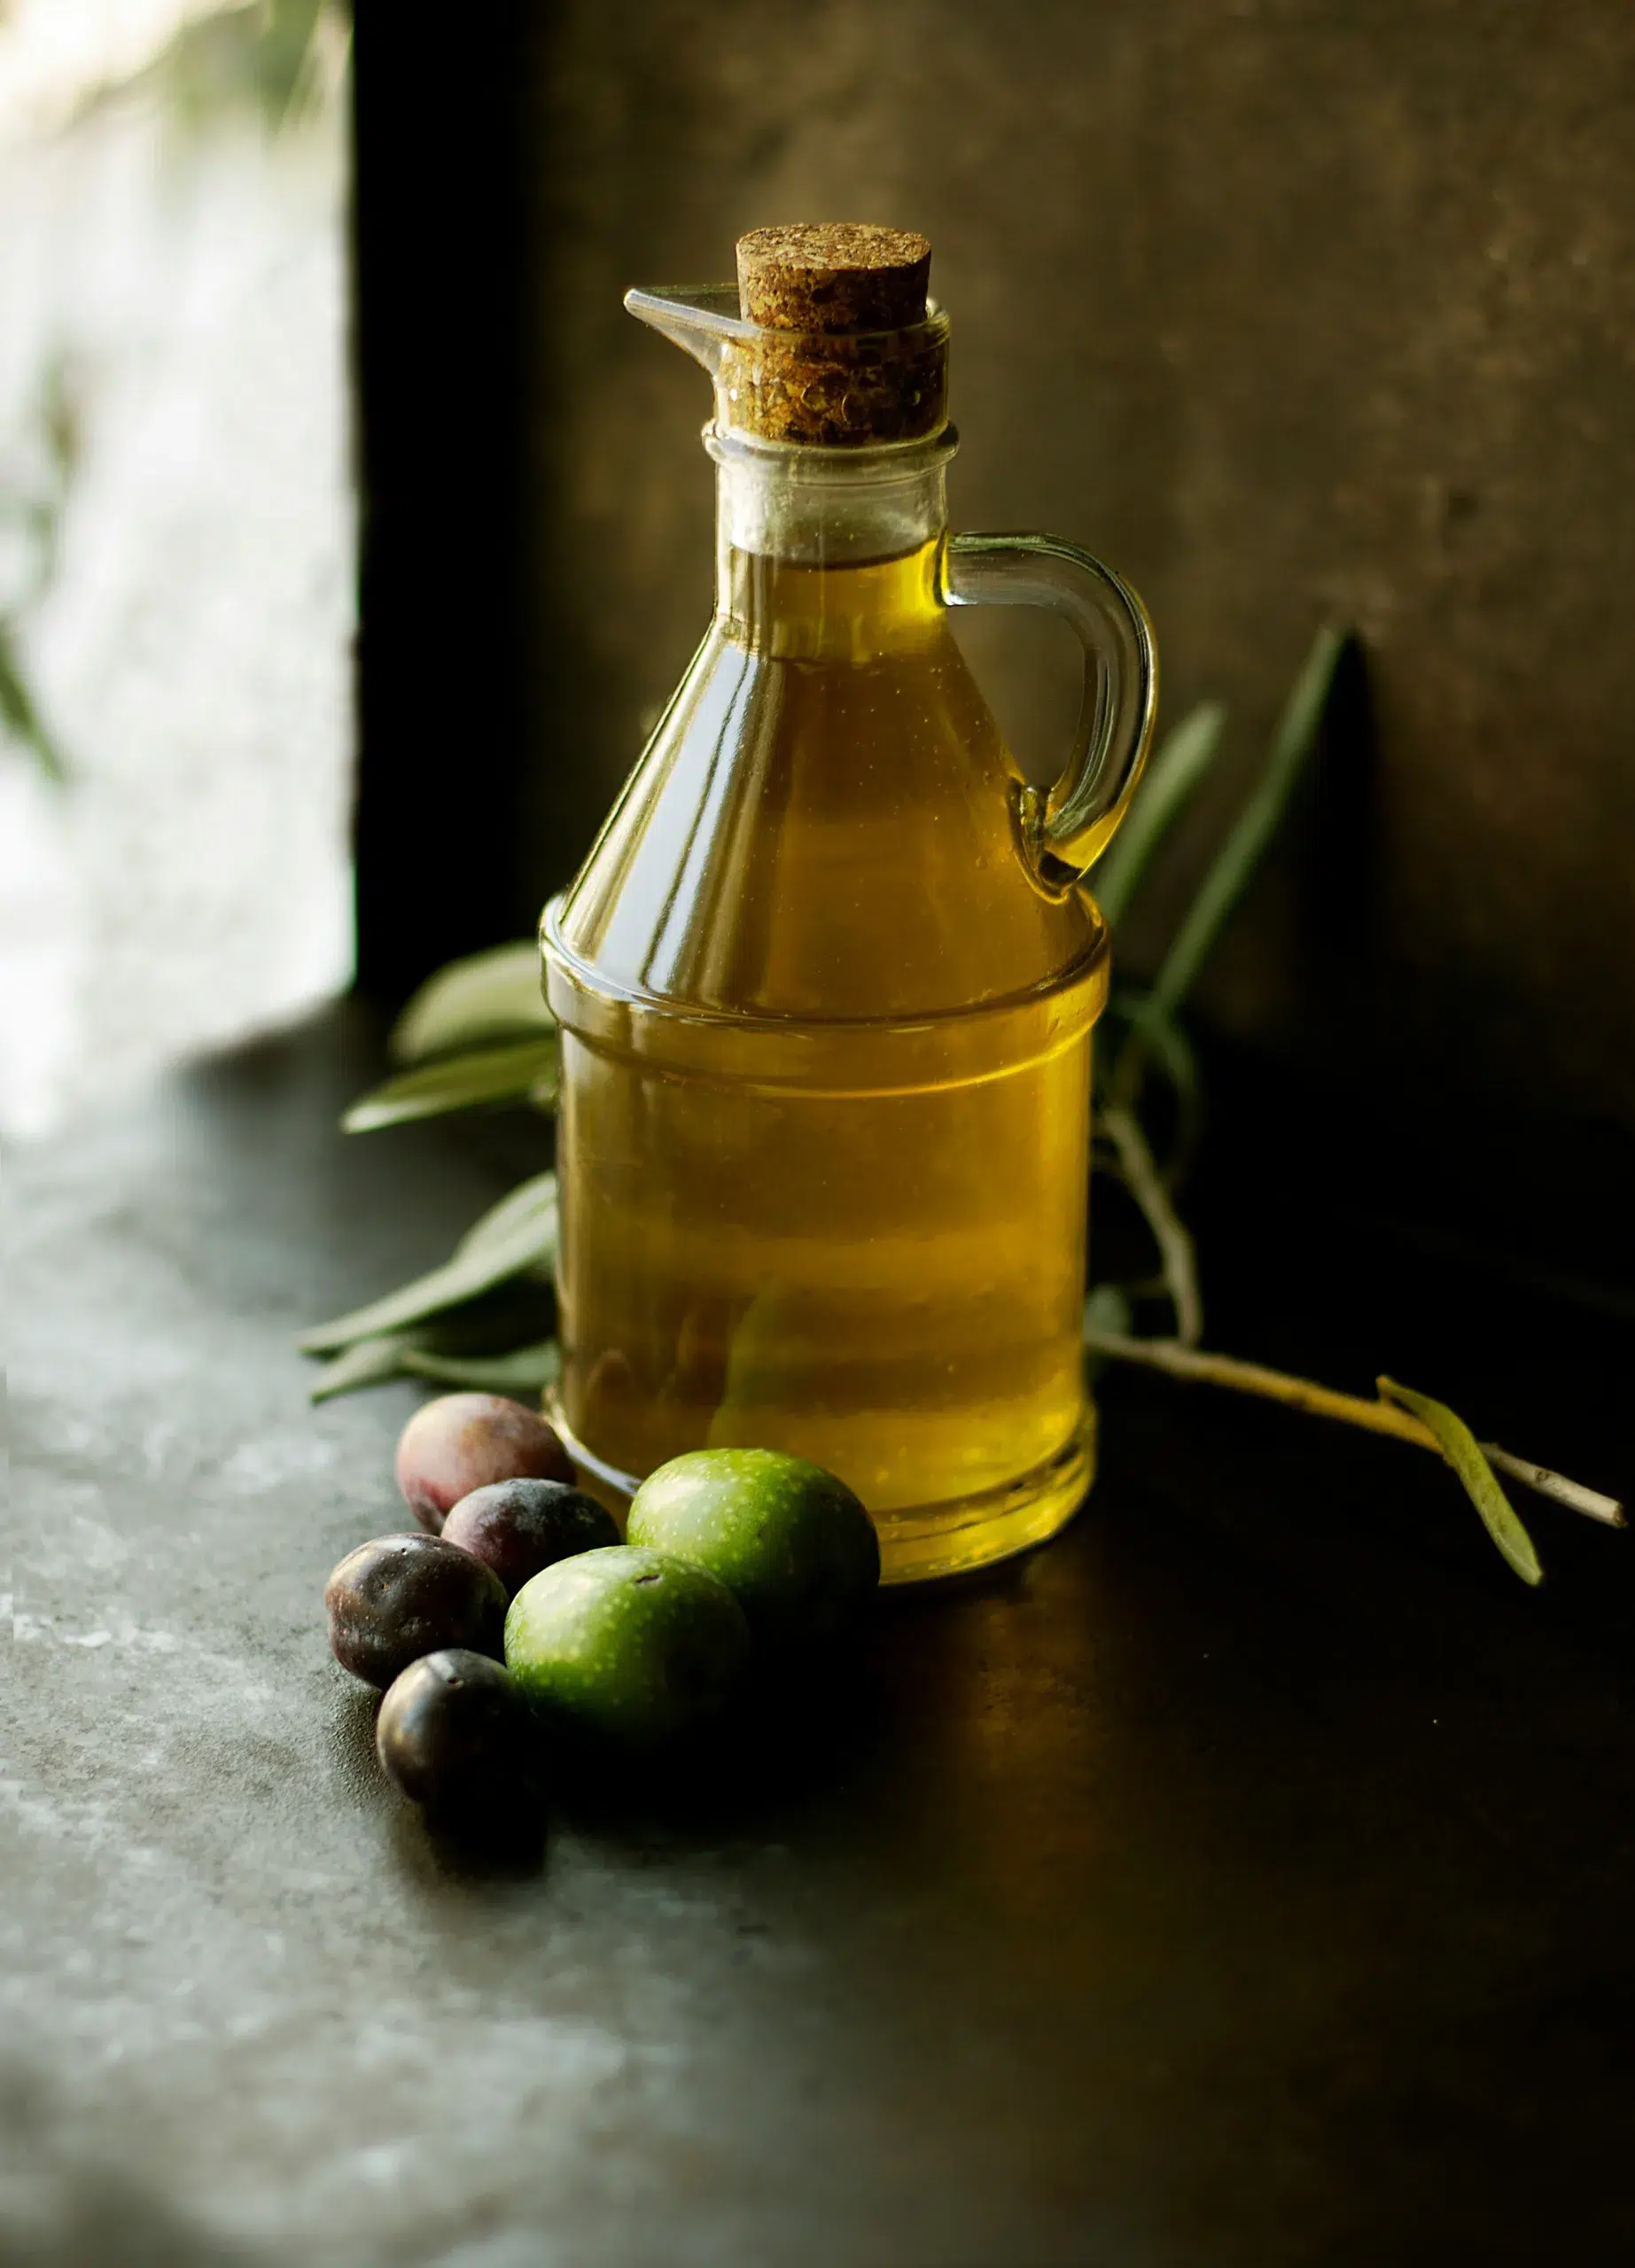 A bottle containing olive oil